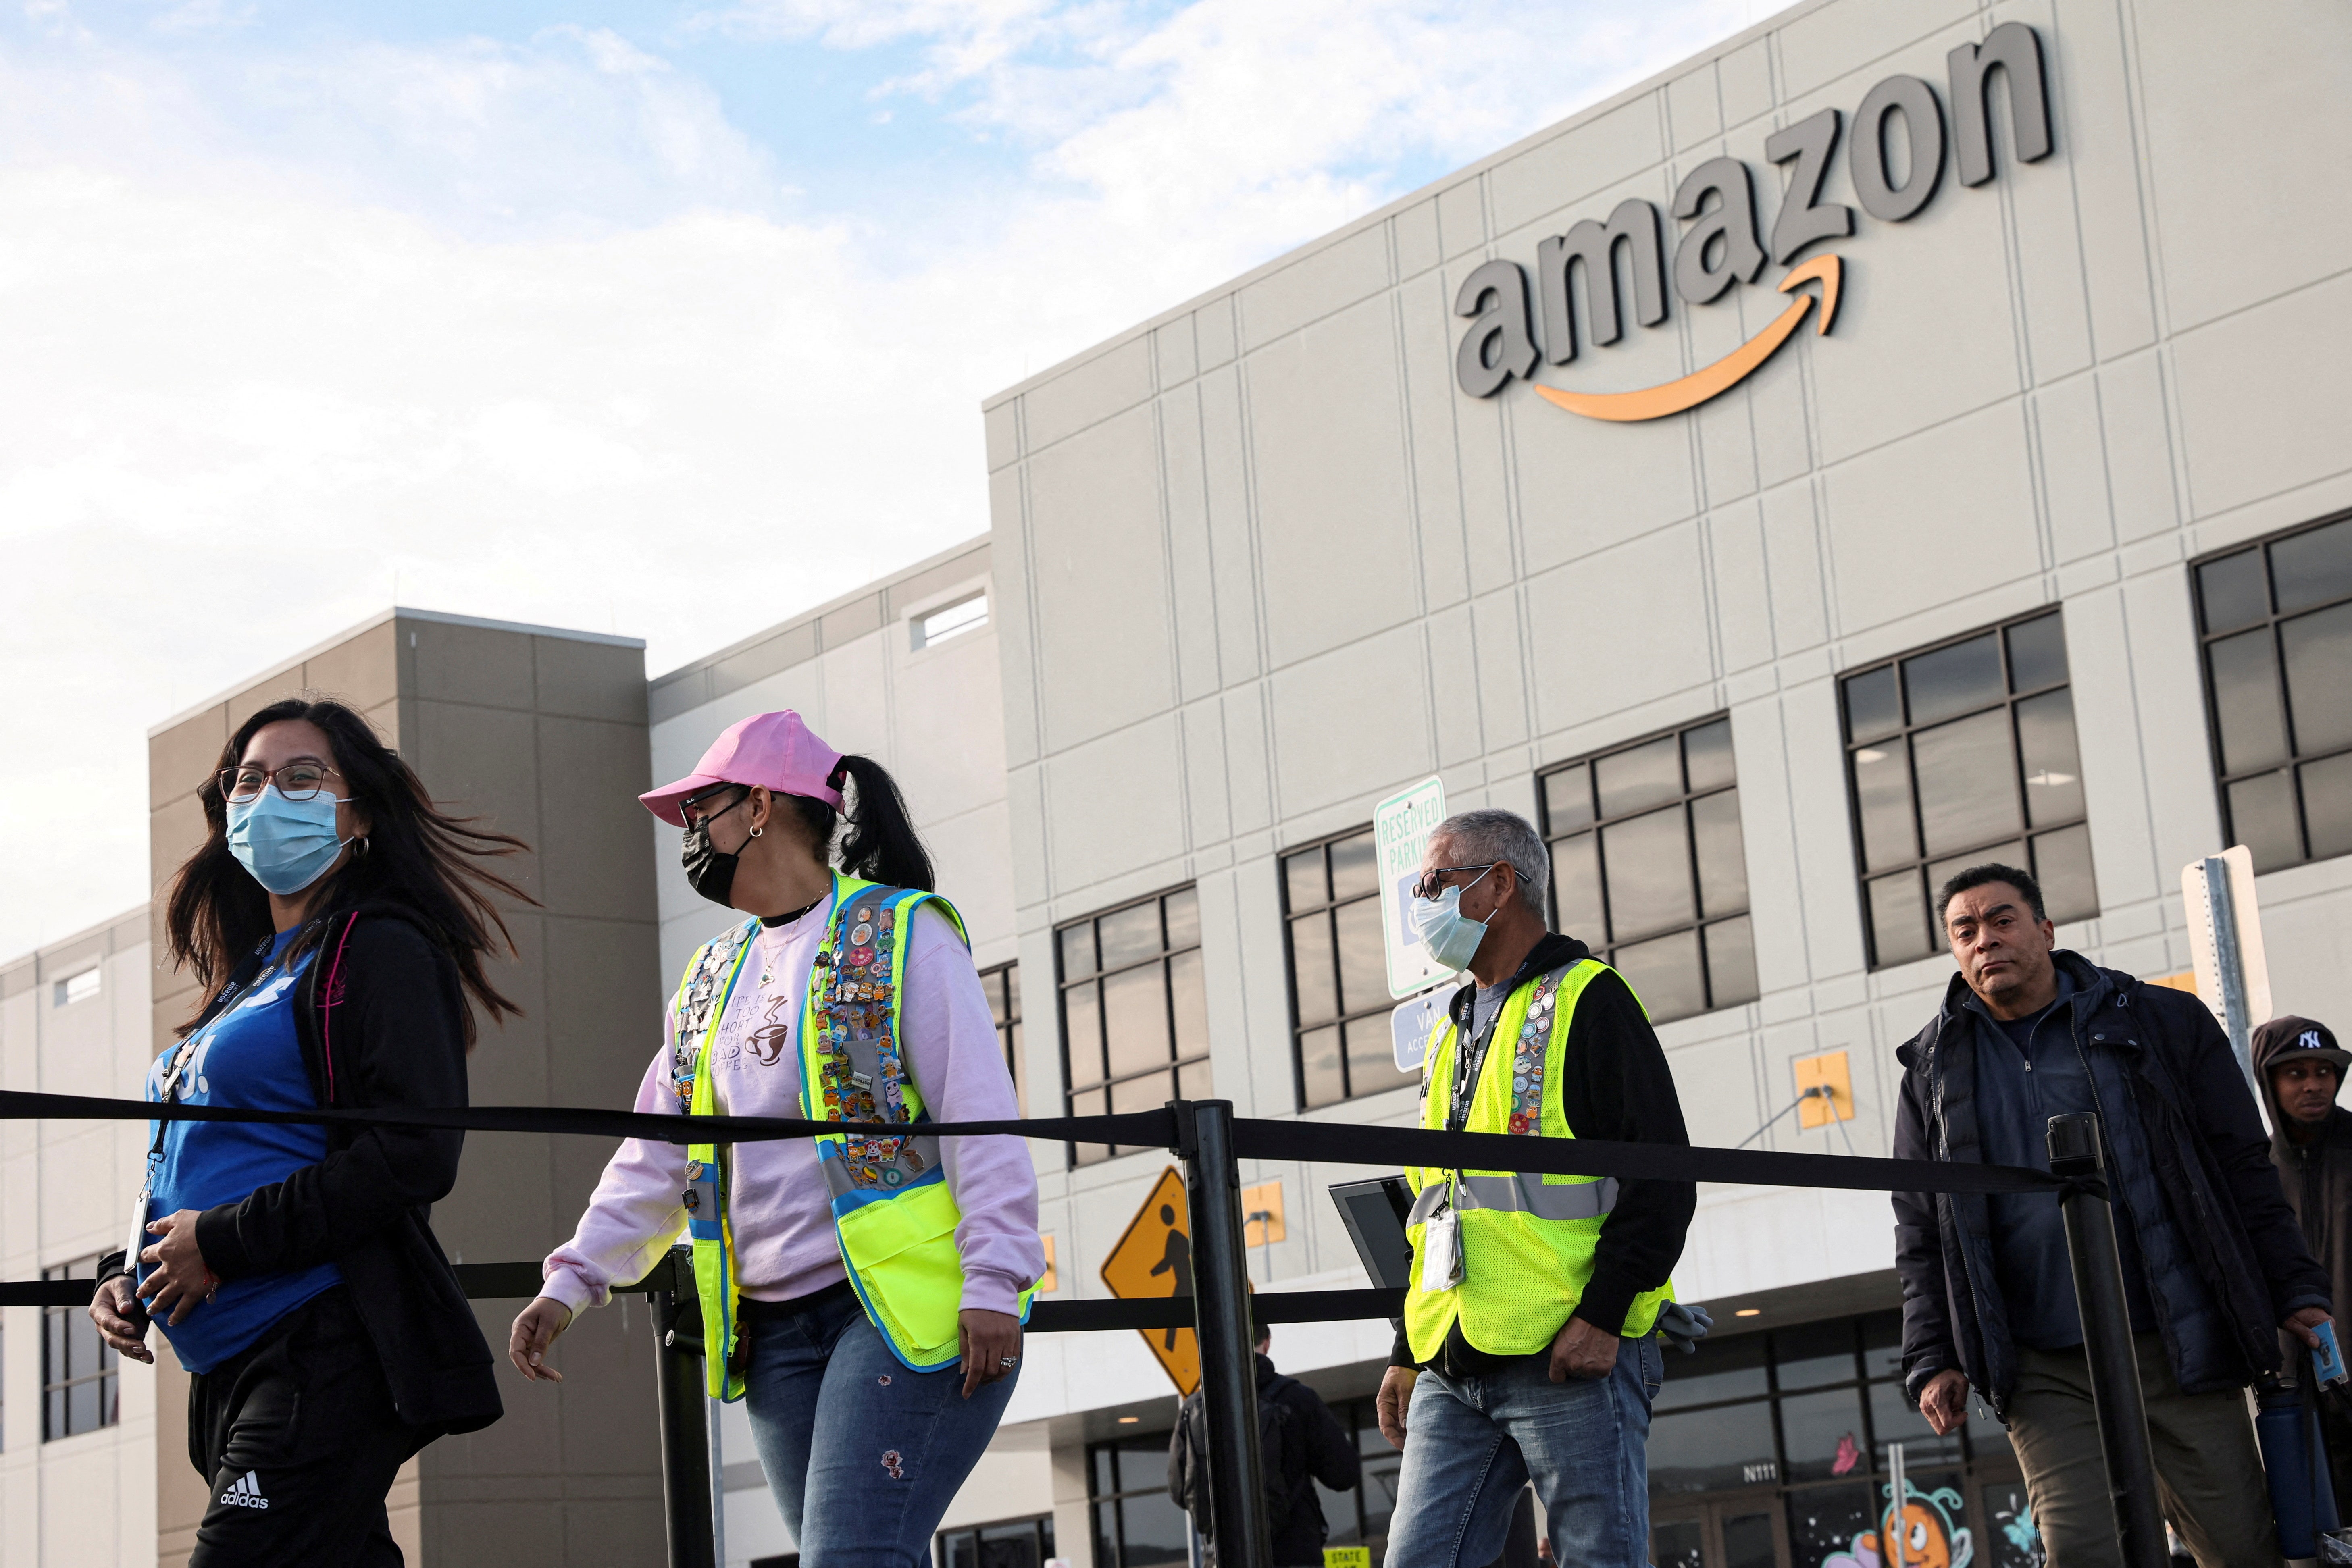 Amazon union could face a tough road ahead after victory